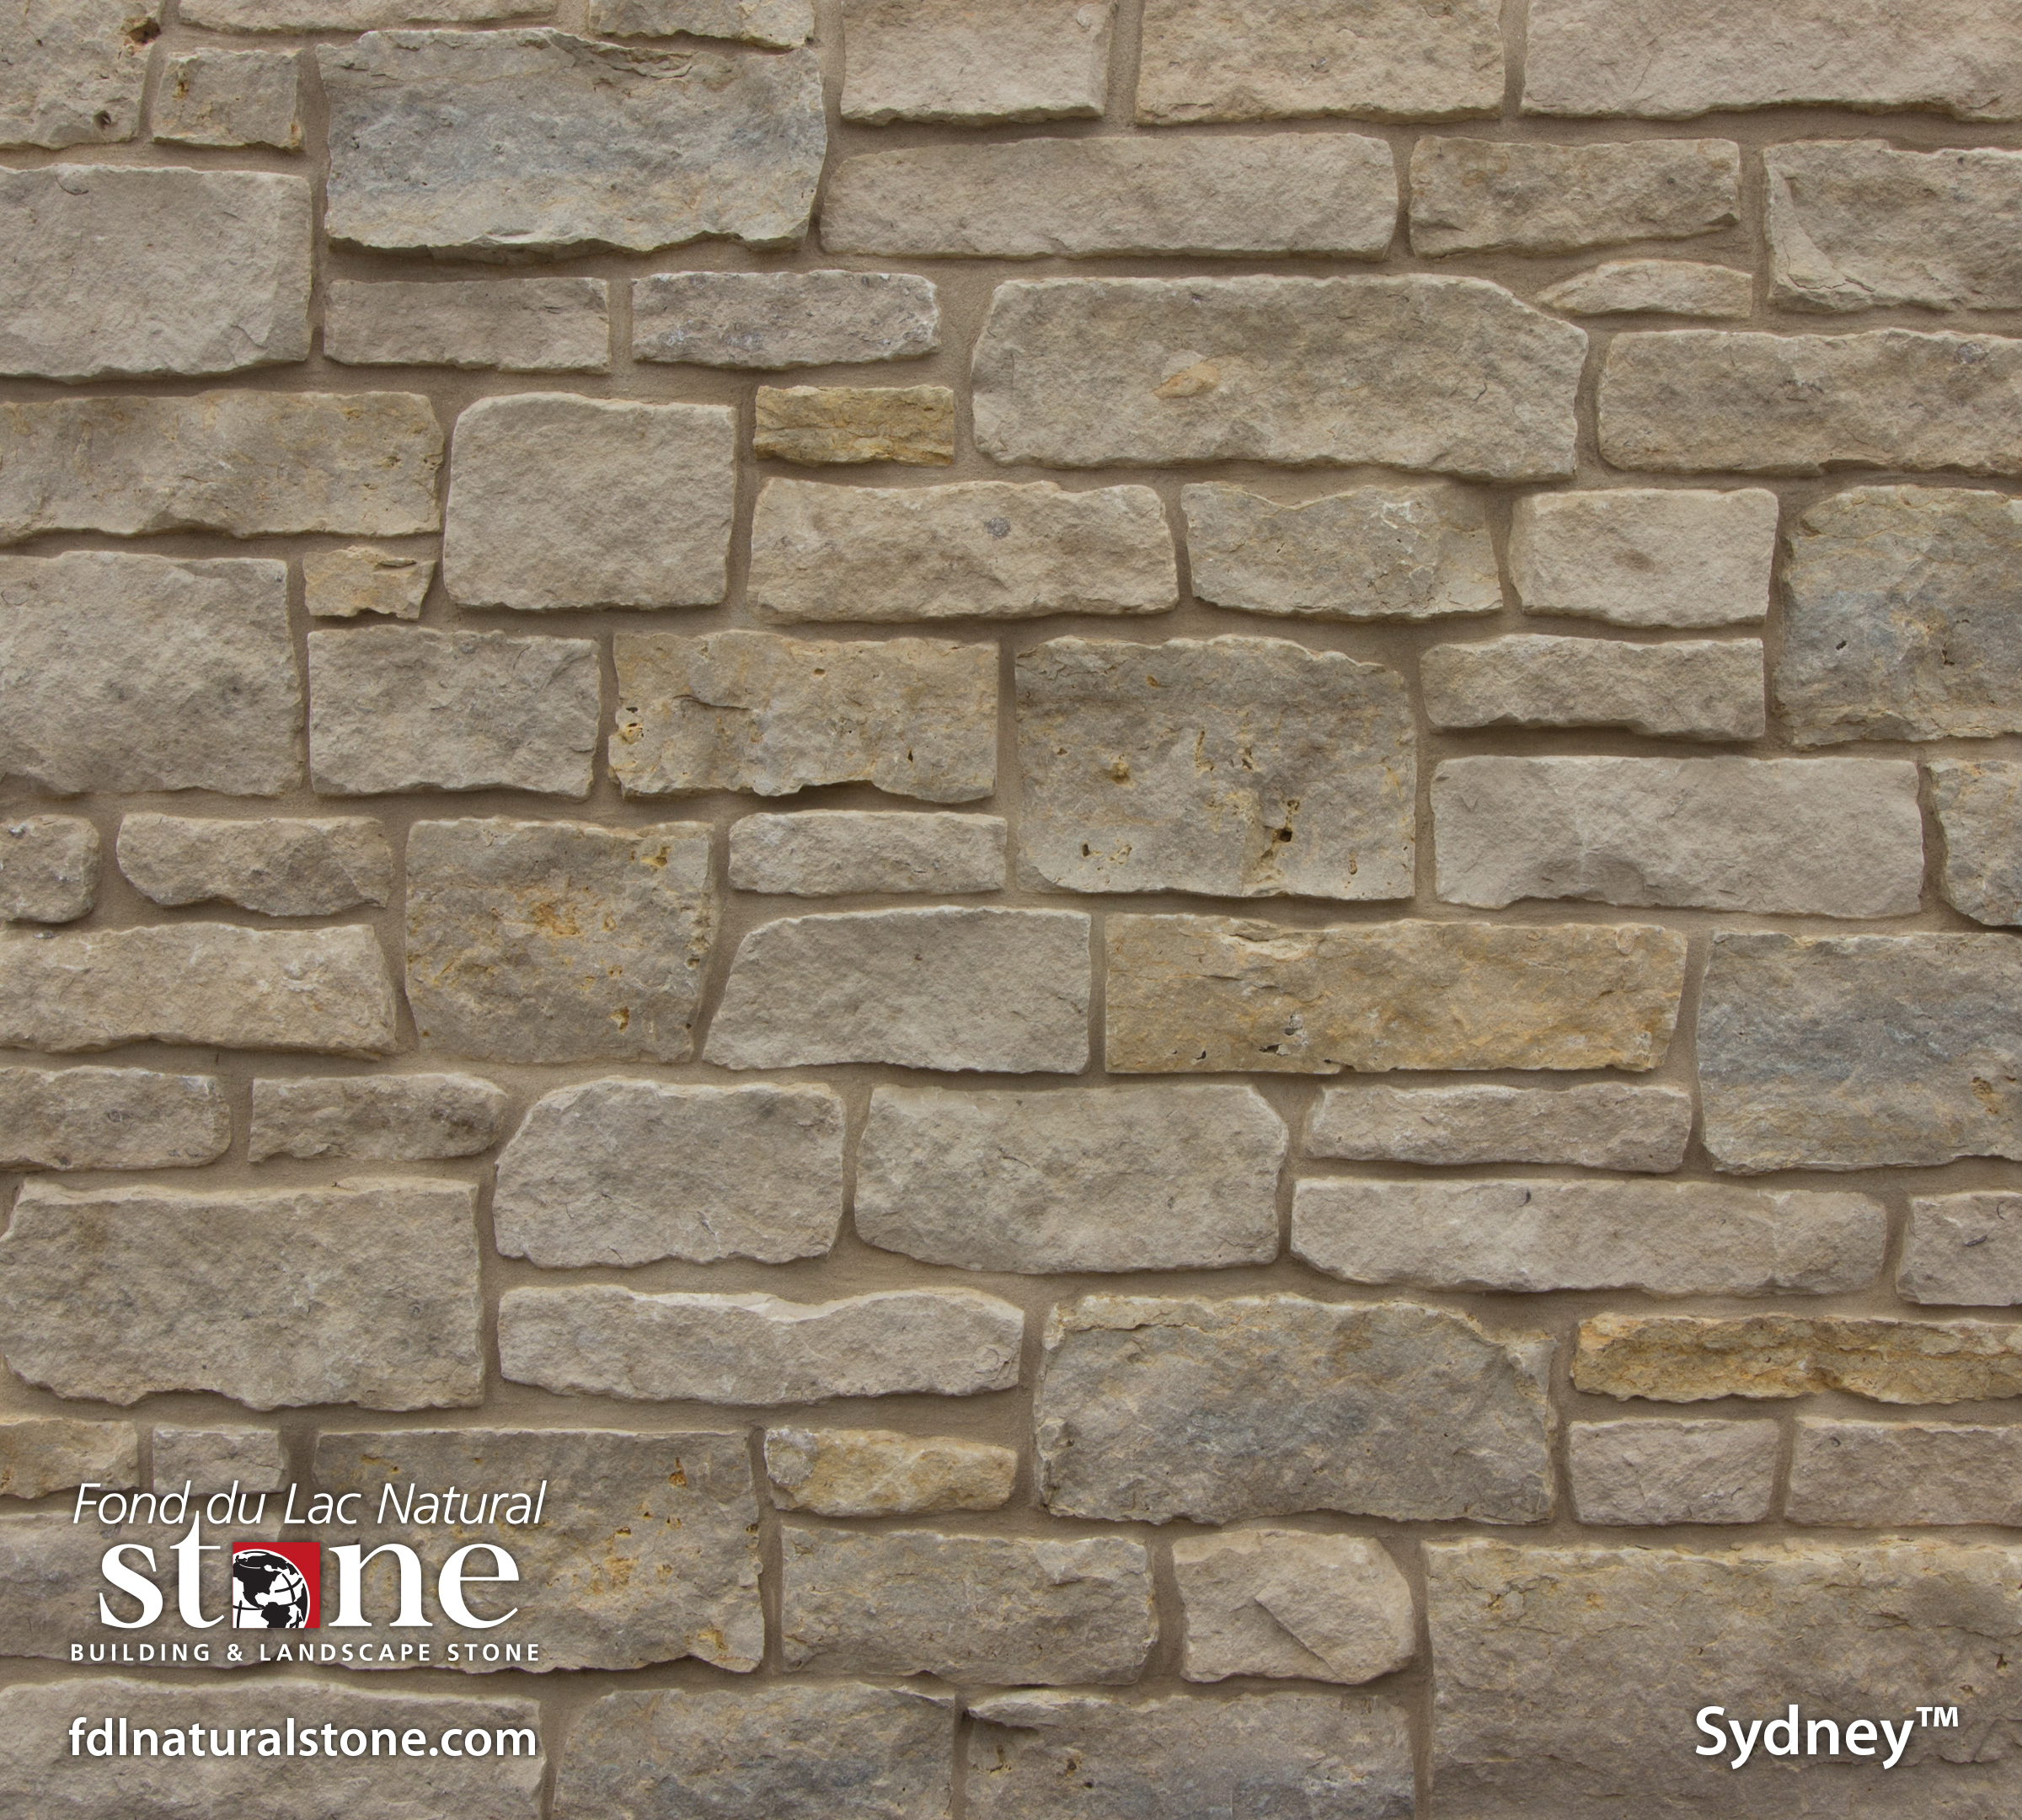 Tundra Country™ - Fond du Lac Natural Stone